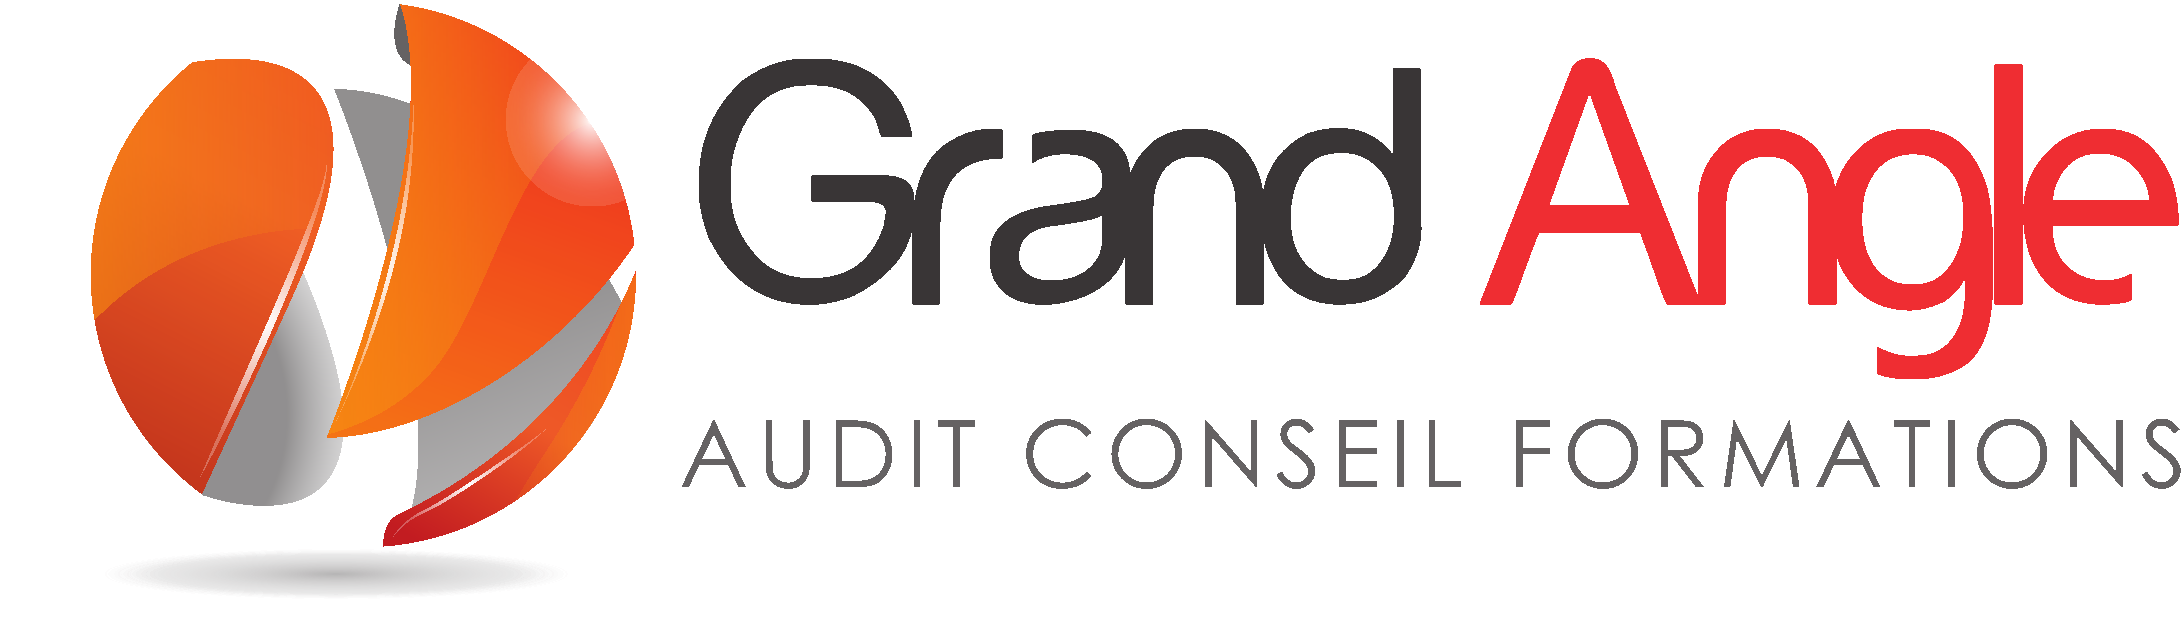 GRAND ANGLE AUDIT CONSEIL FORMATION